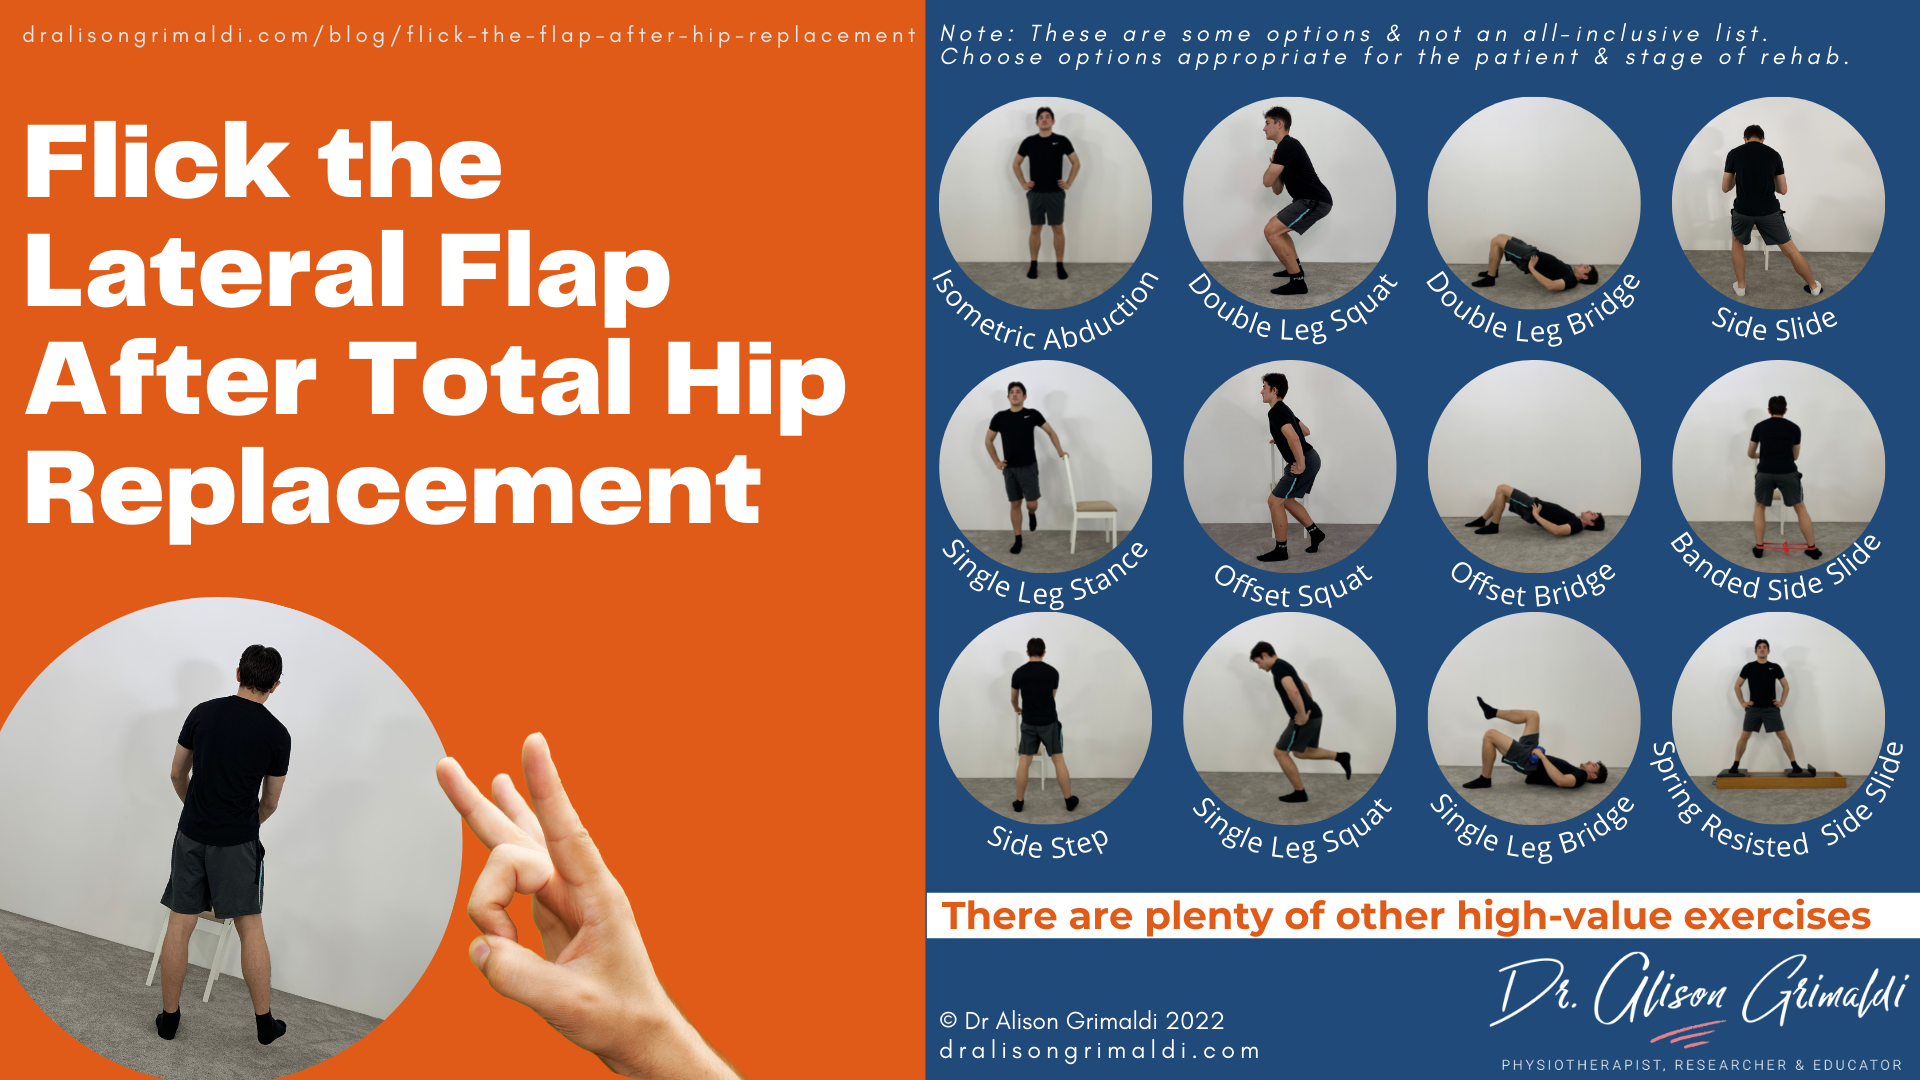 Flick the Lateral Flap After Total Hip Replacement